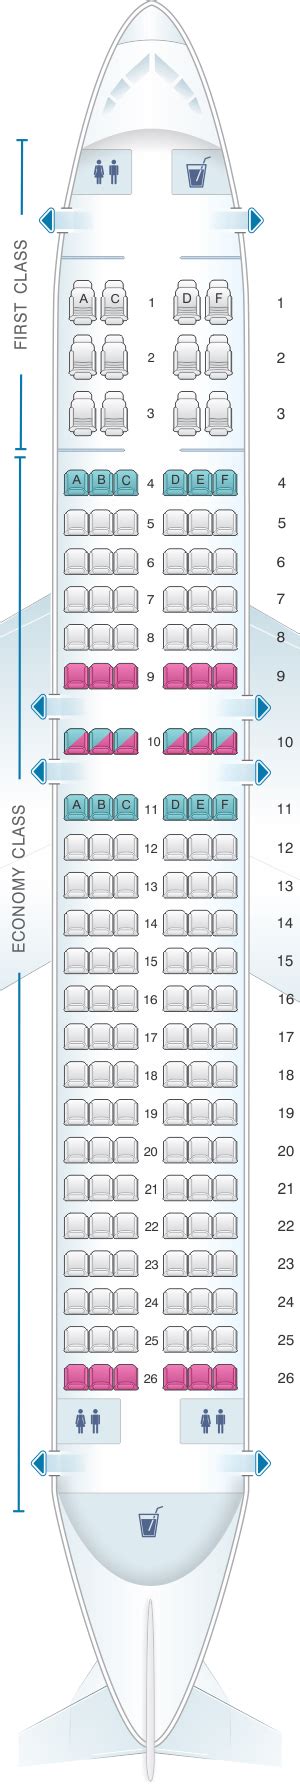 The American Airlines Airbus A321 (321) 181 passenger version is primarily used on Domestic US routes. This next-generation aircraft features a First Class cabin with 16 recliner-style seats. The Main Cabin features 165 standard Economy Class-style seats arranged in a 3-3 configuration.. 